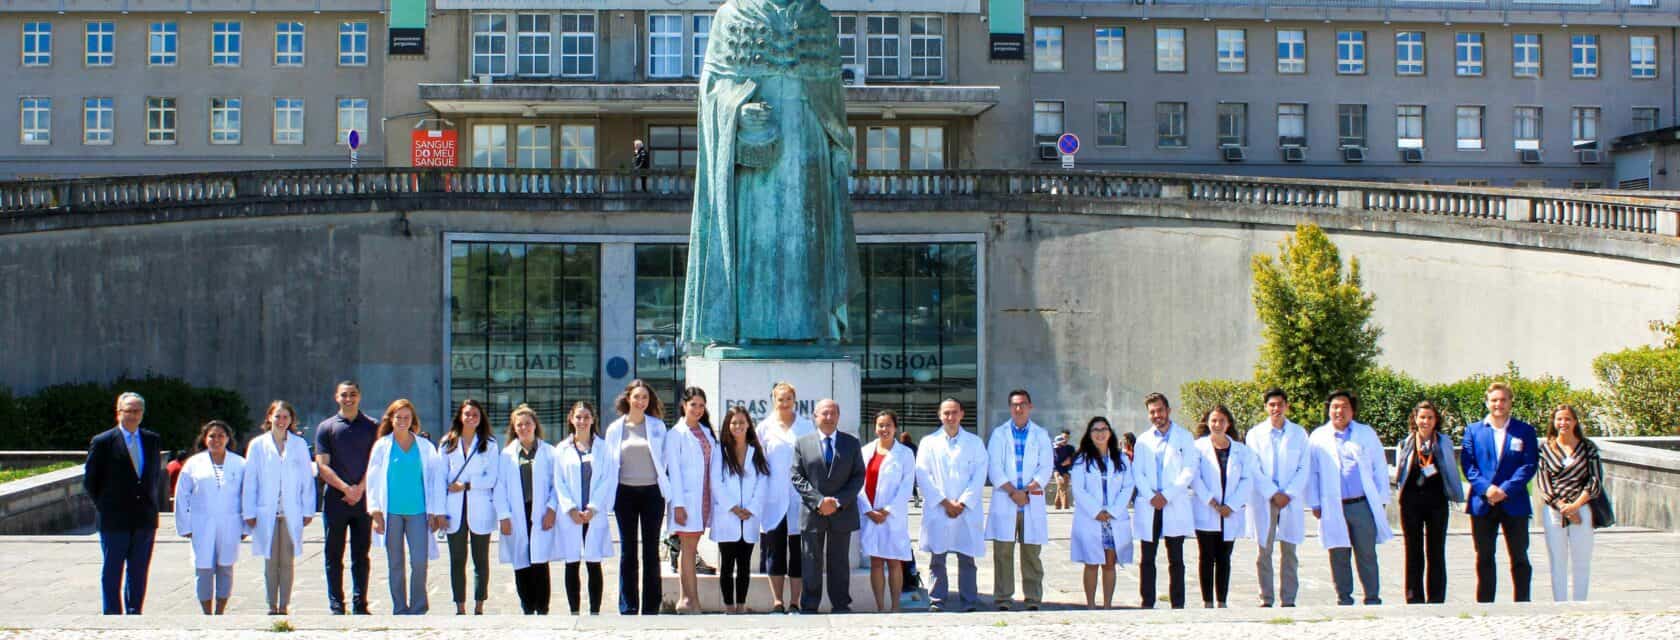 Students standing in front of the hospital where they will be shadowing.